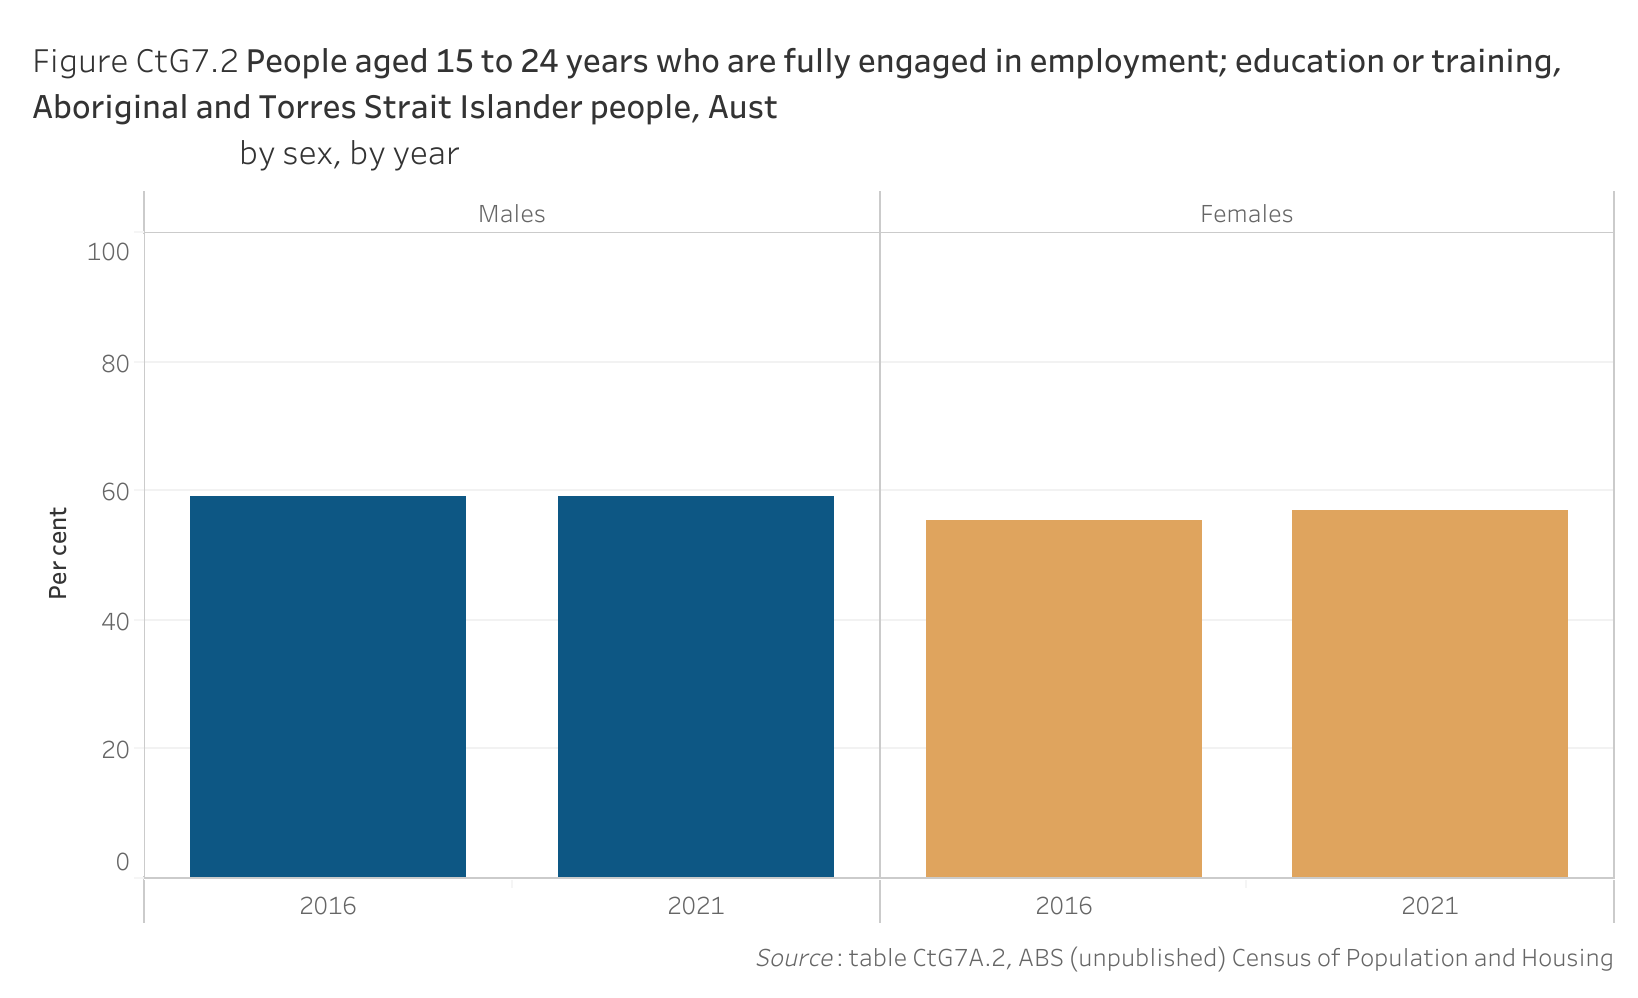 Figure CtG7.2 shows people aged 15 to 24 years who are fully engaged in employment; education or training, Aboriginal and Torres Strait Islander people, Australia, by sex, by year. More details can be found within the text near this image.